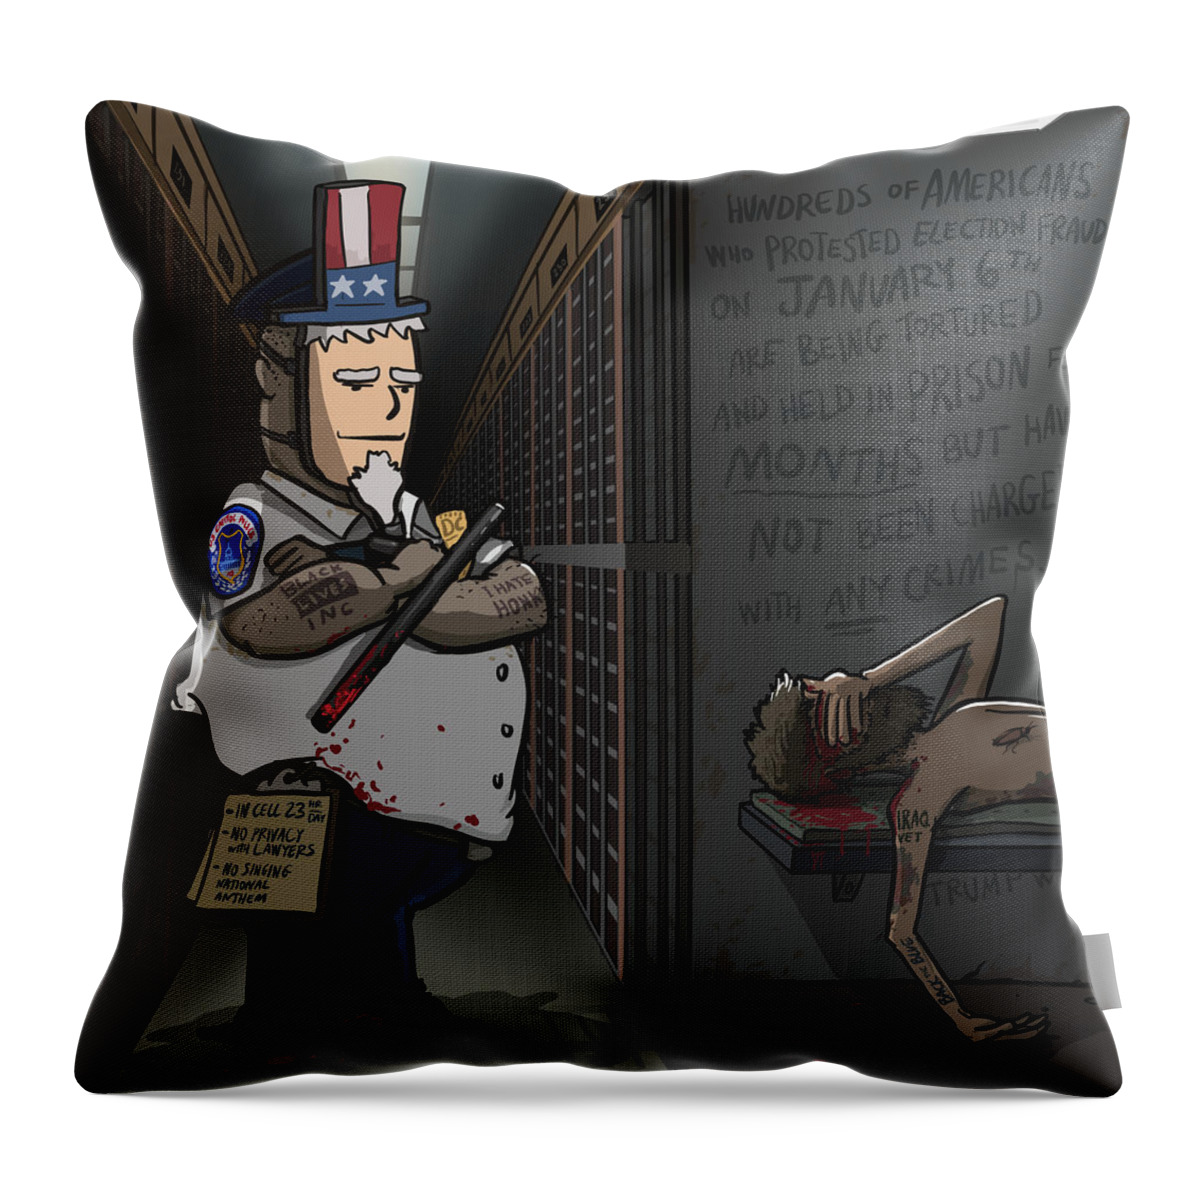 January 6th Throw Pillow featuring the digital art January 6th Political Prisoners by Emerson Design